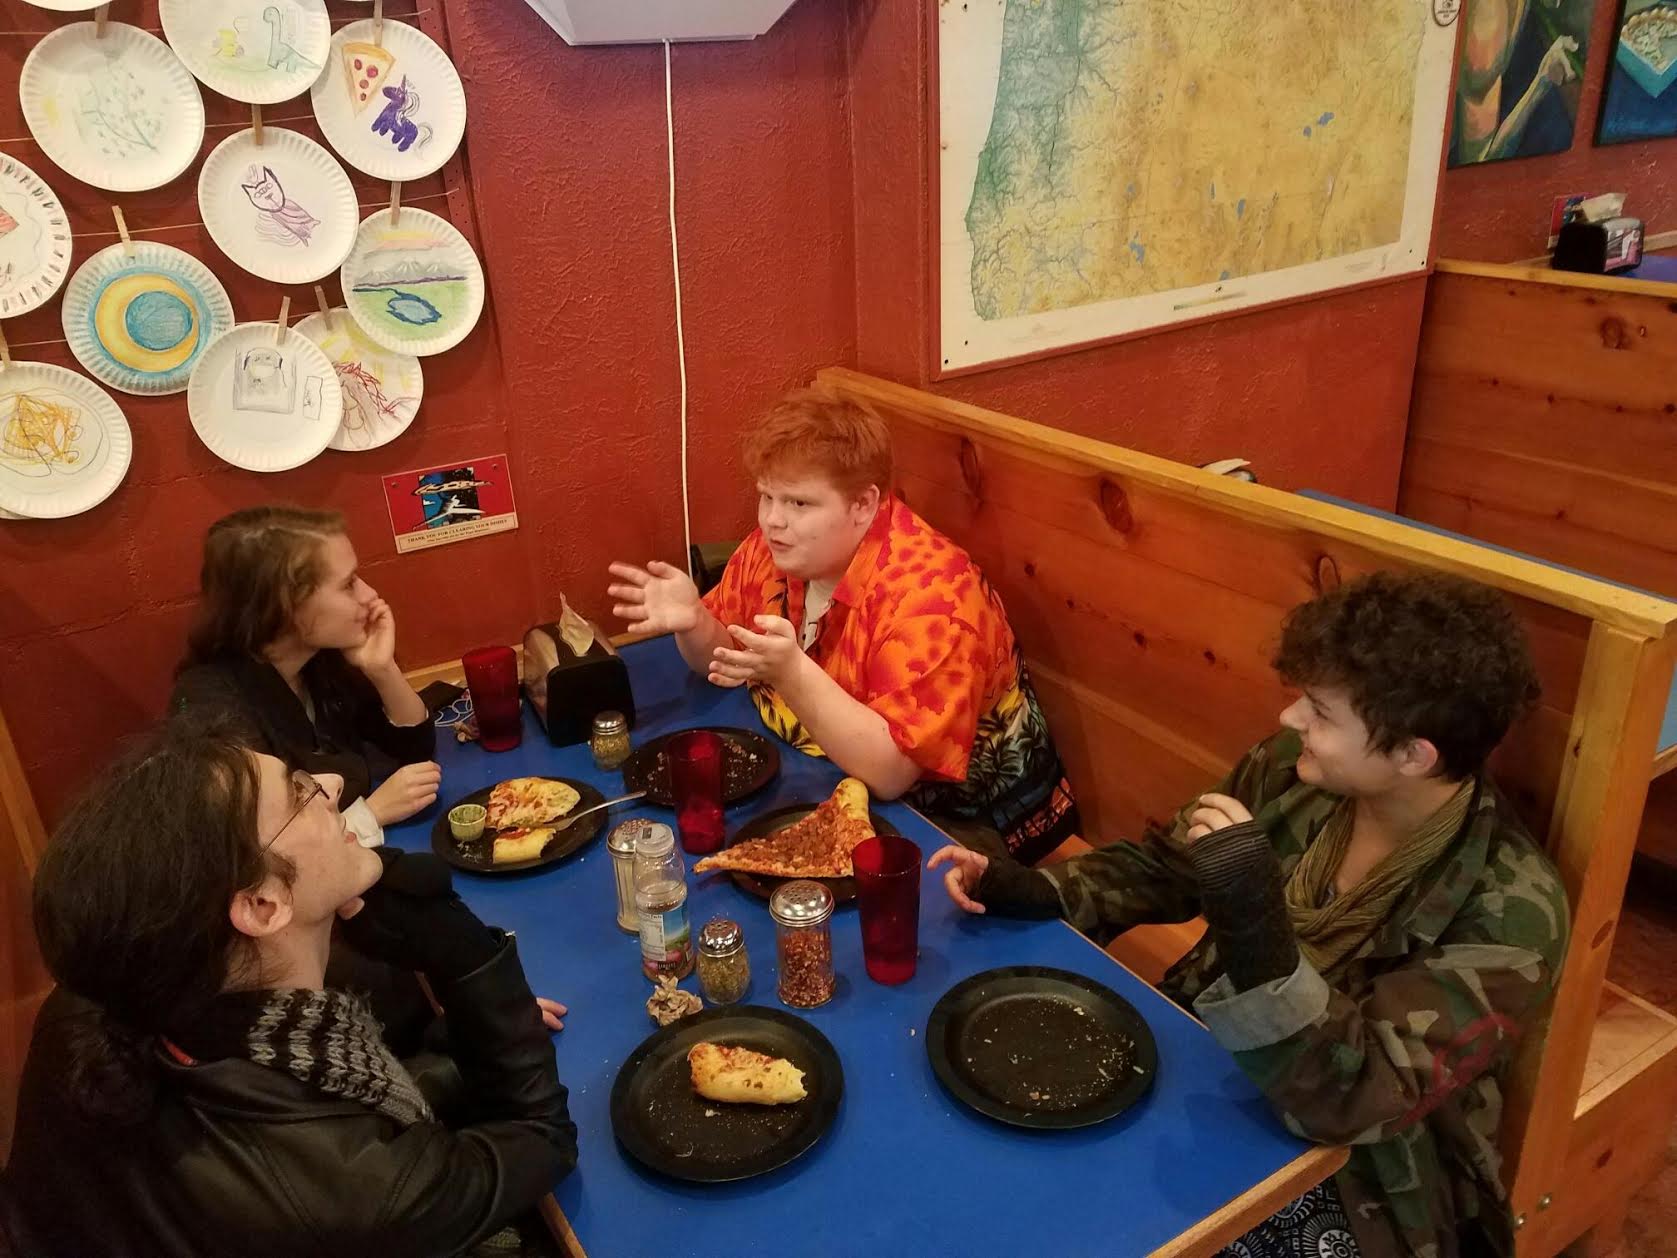 Tour A Whirlwind Of Sex And Drugs Imagines Teenage Band At Pizza Place